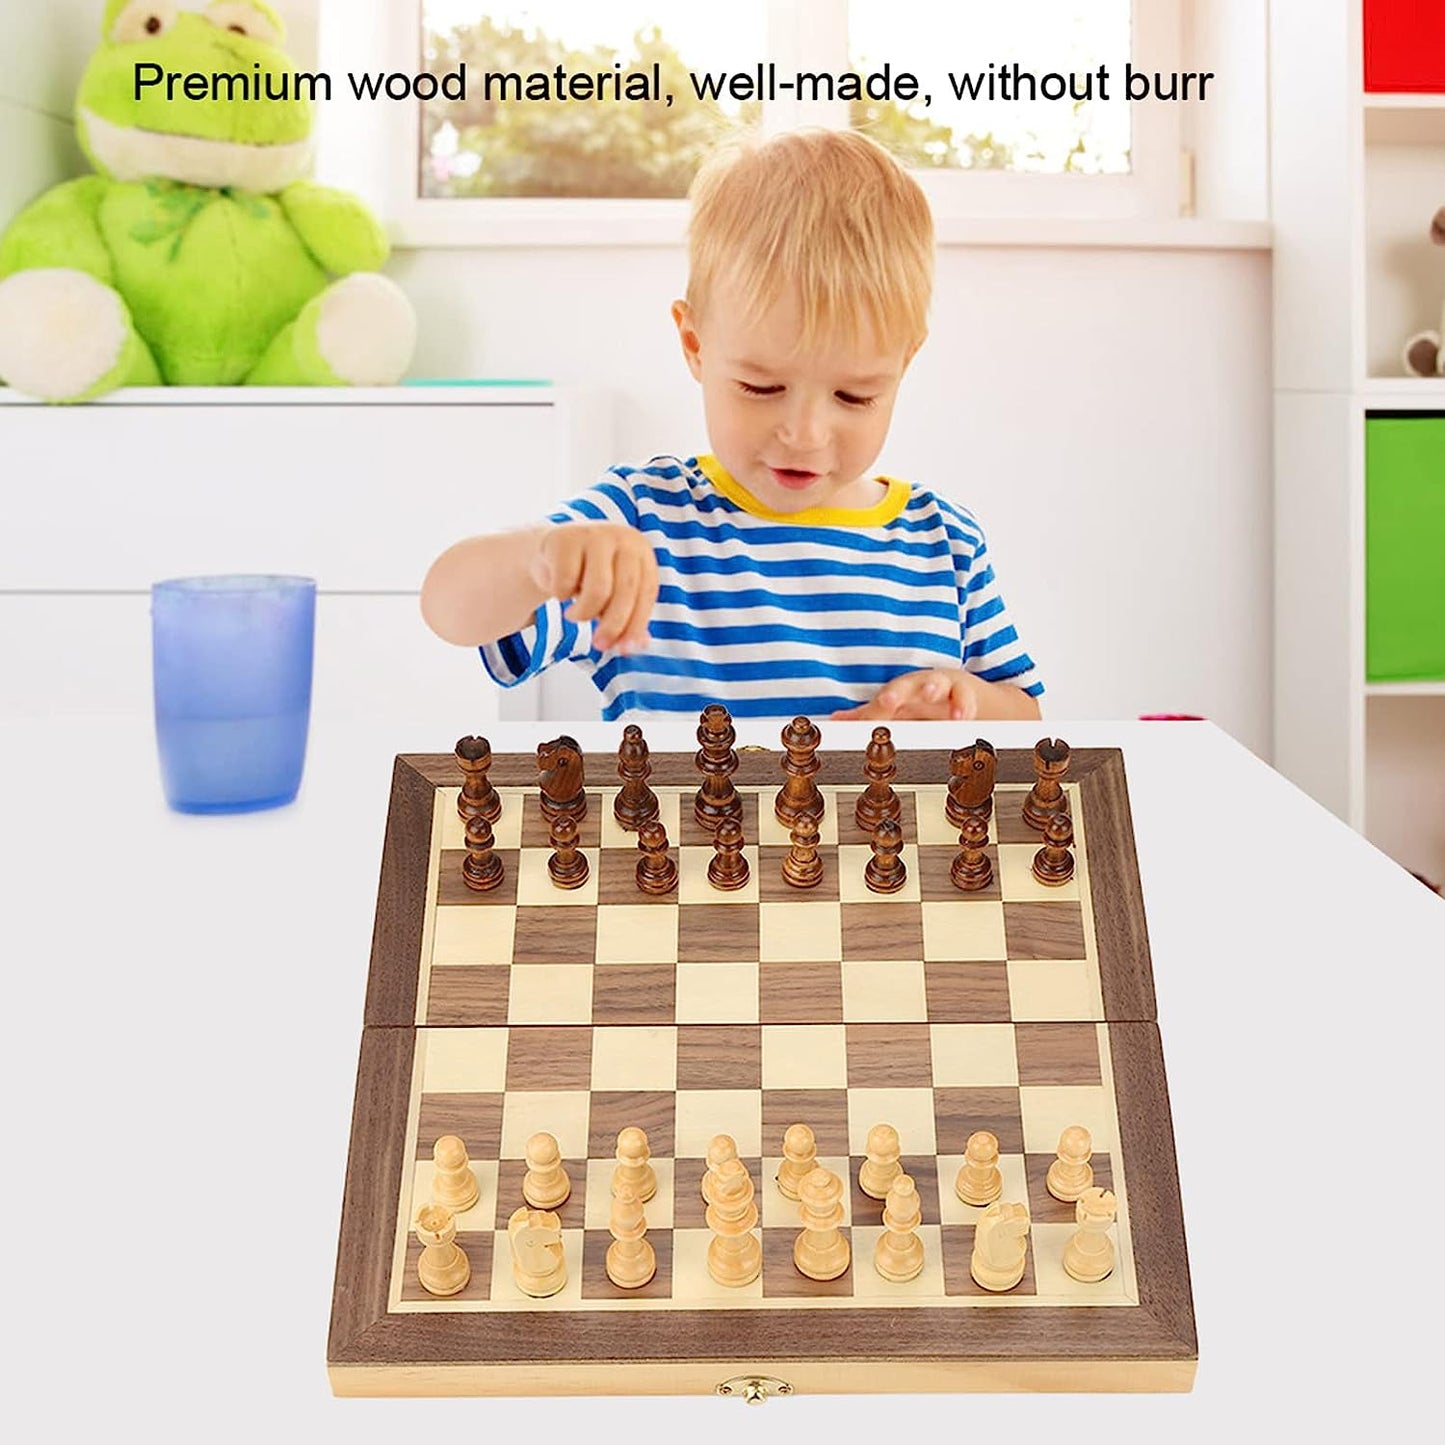 Portable Wooden Magnetic Chess Set Folding Board Desktop Game Toy for Kids Beginners Adults